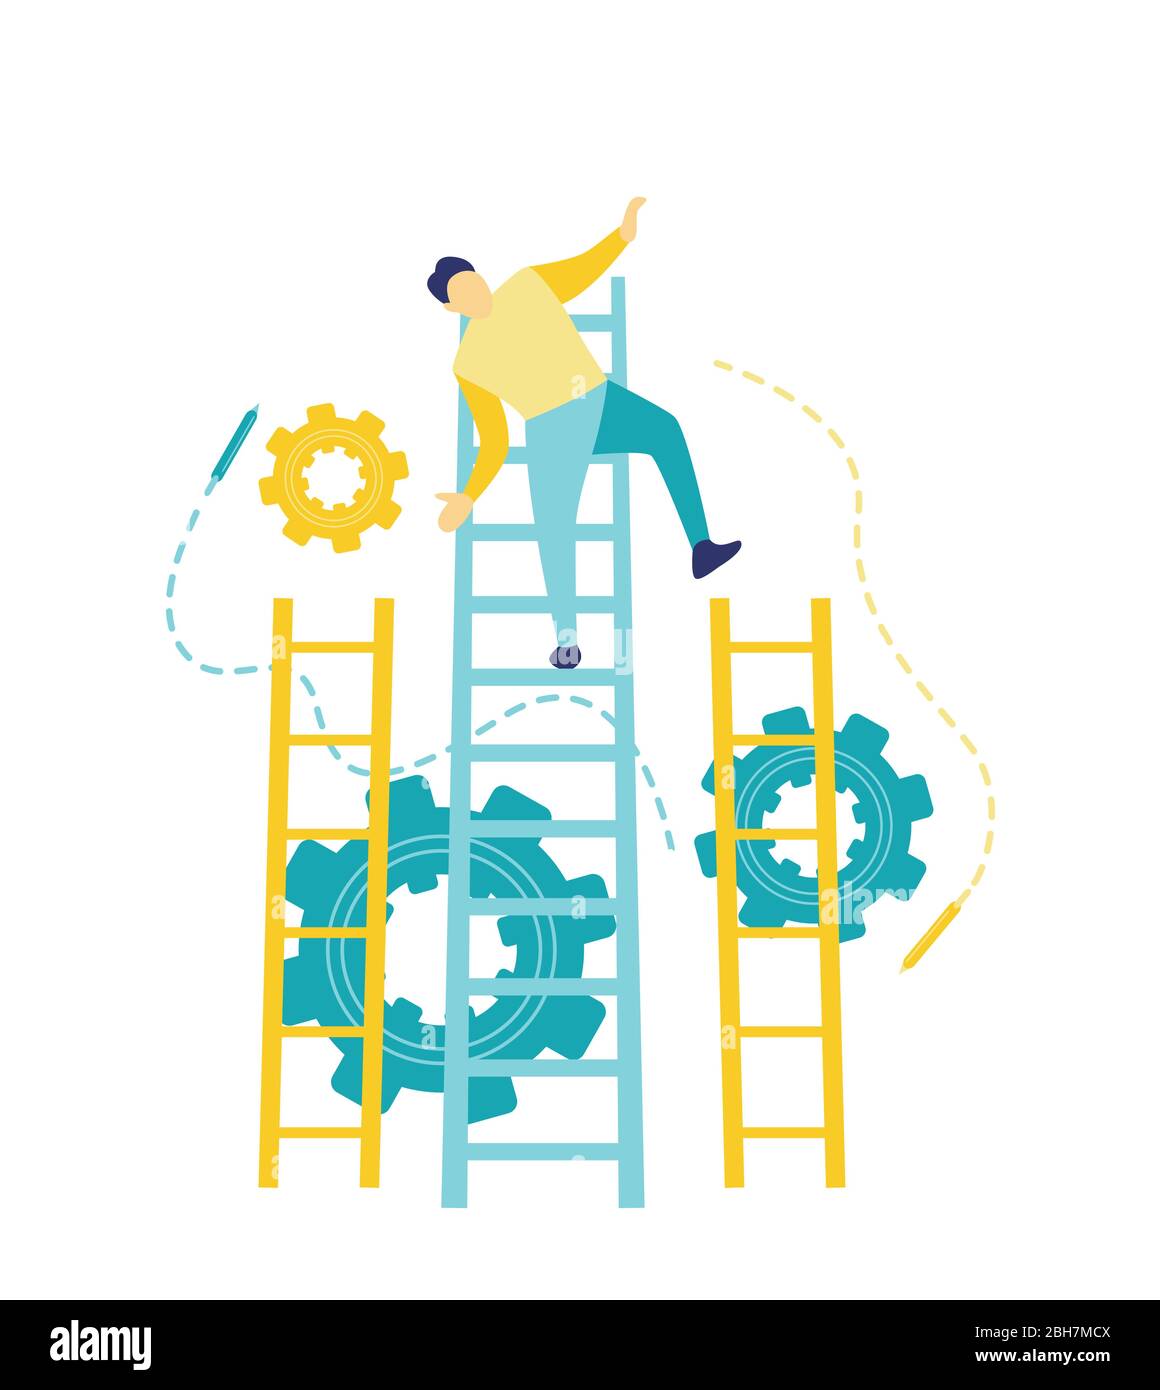 Flat vector illustration, a man who was fired and fell from the career ladder. The concept of failure of a young business man in blue and yellow. Stock Vector